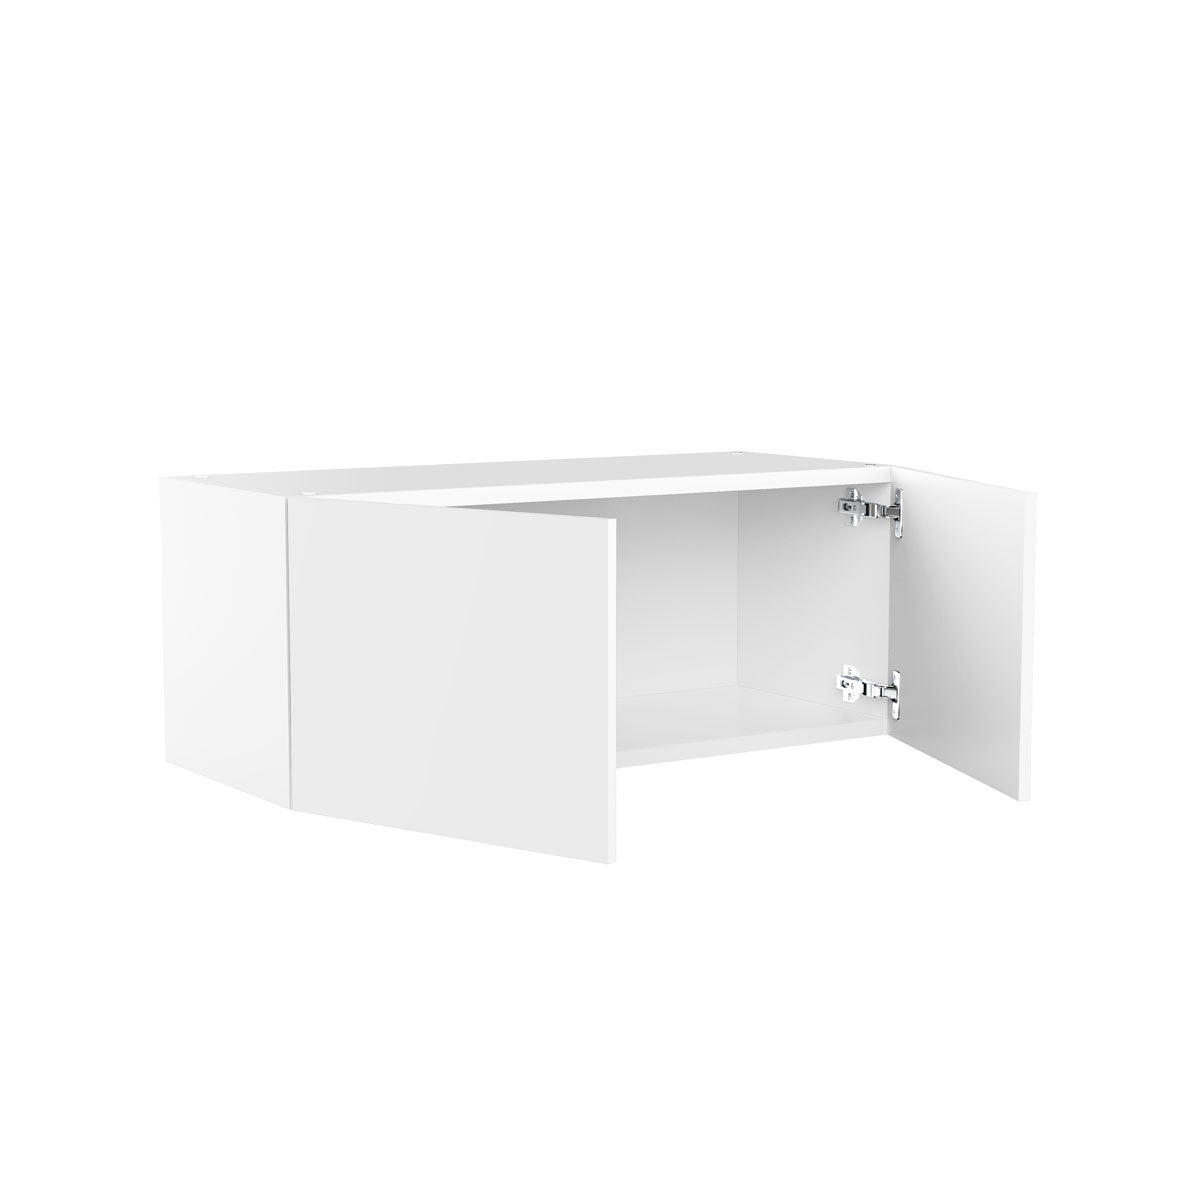 RTA - Glossy White - Double Door Wall Cabinets | 33"W x 12"H x 12"D